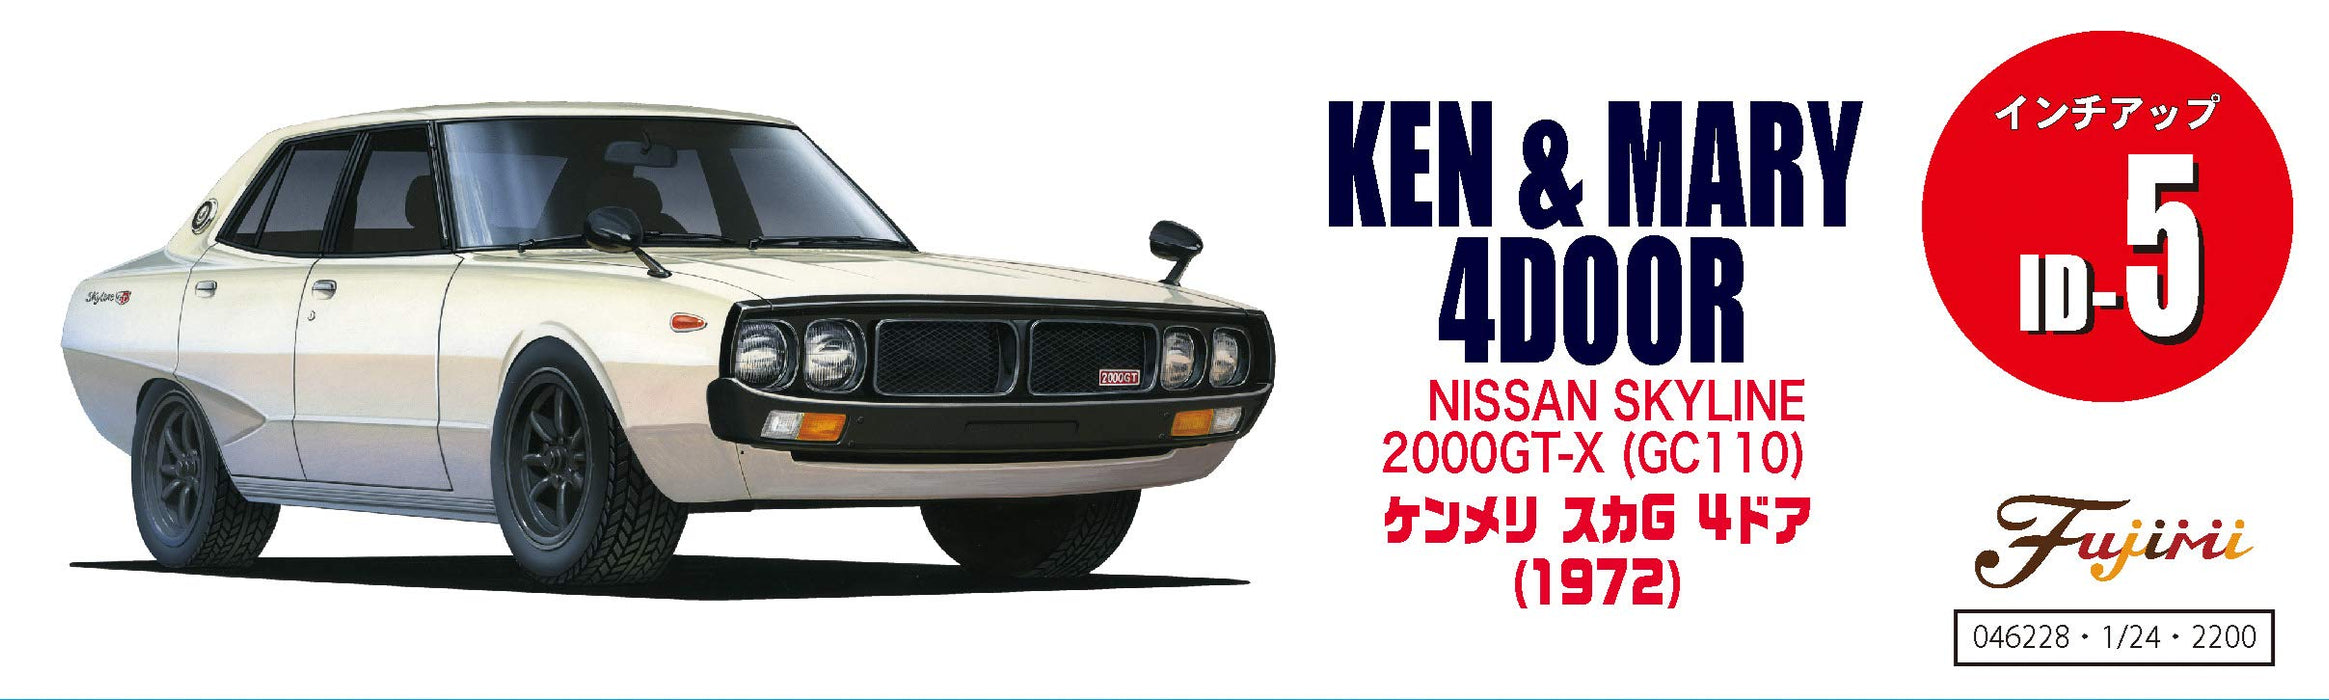 Fujimi Inch Up 1/24 No.5 NIssan Ken And Mary 4 Door Skyline 2000 Gt-X GC110 Scale Classical Car